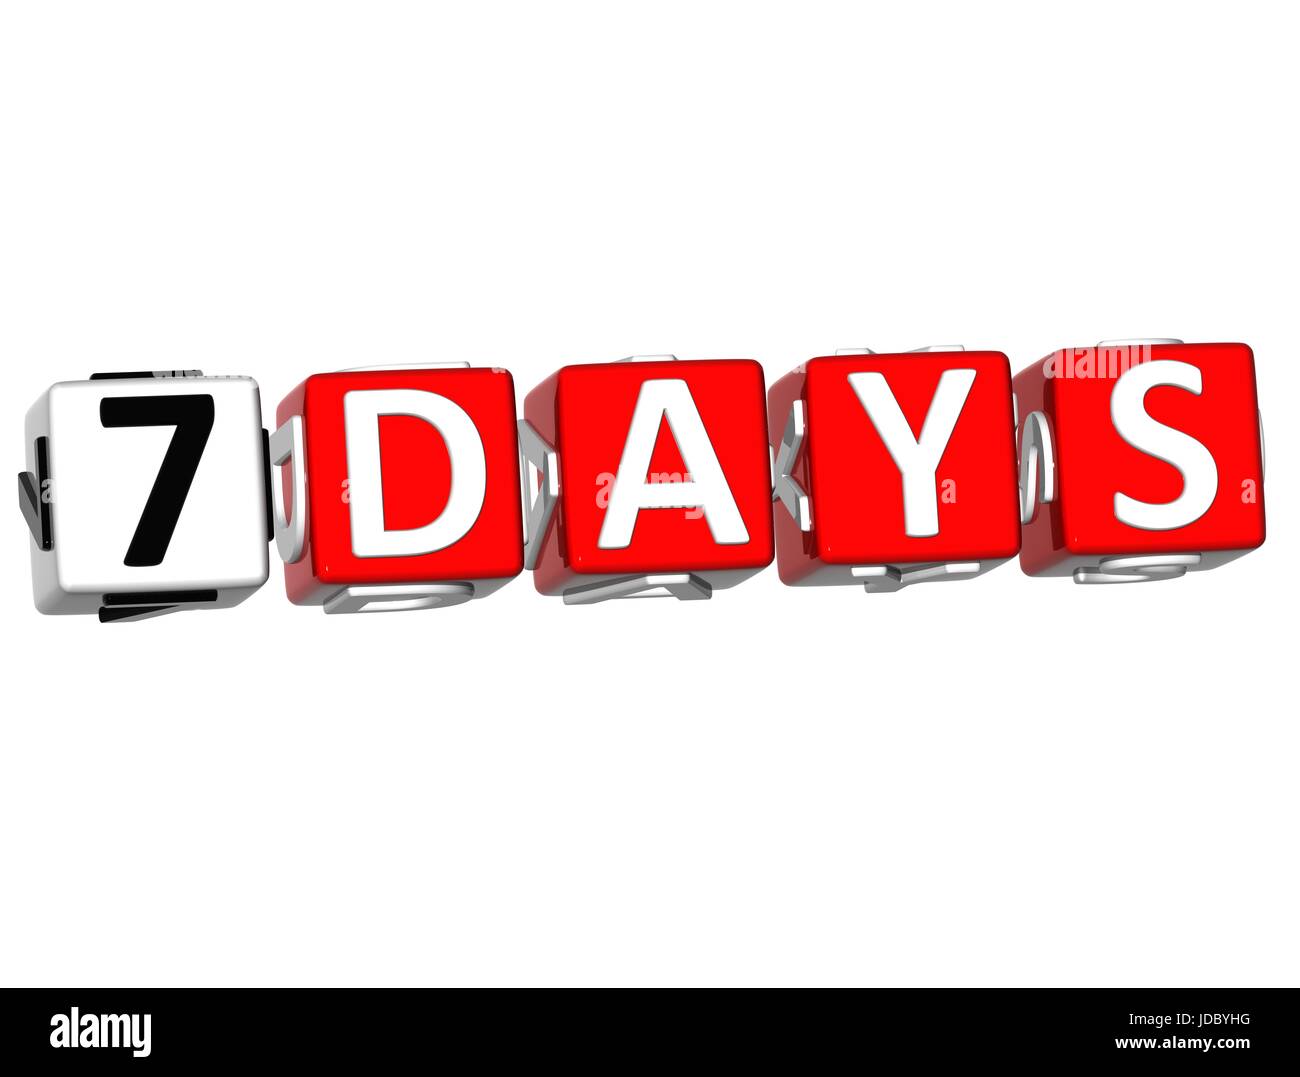 Seven Days cube text on white background Stock Photo